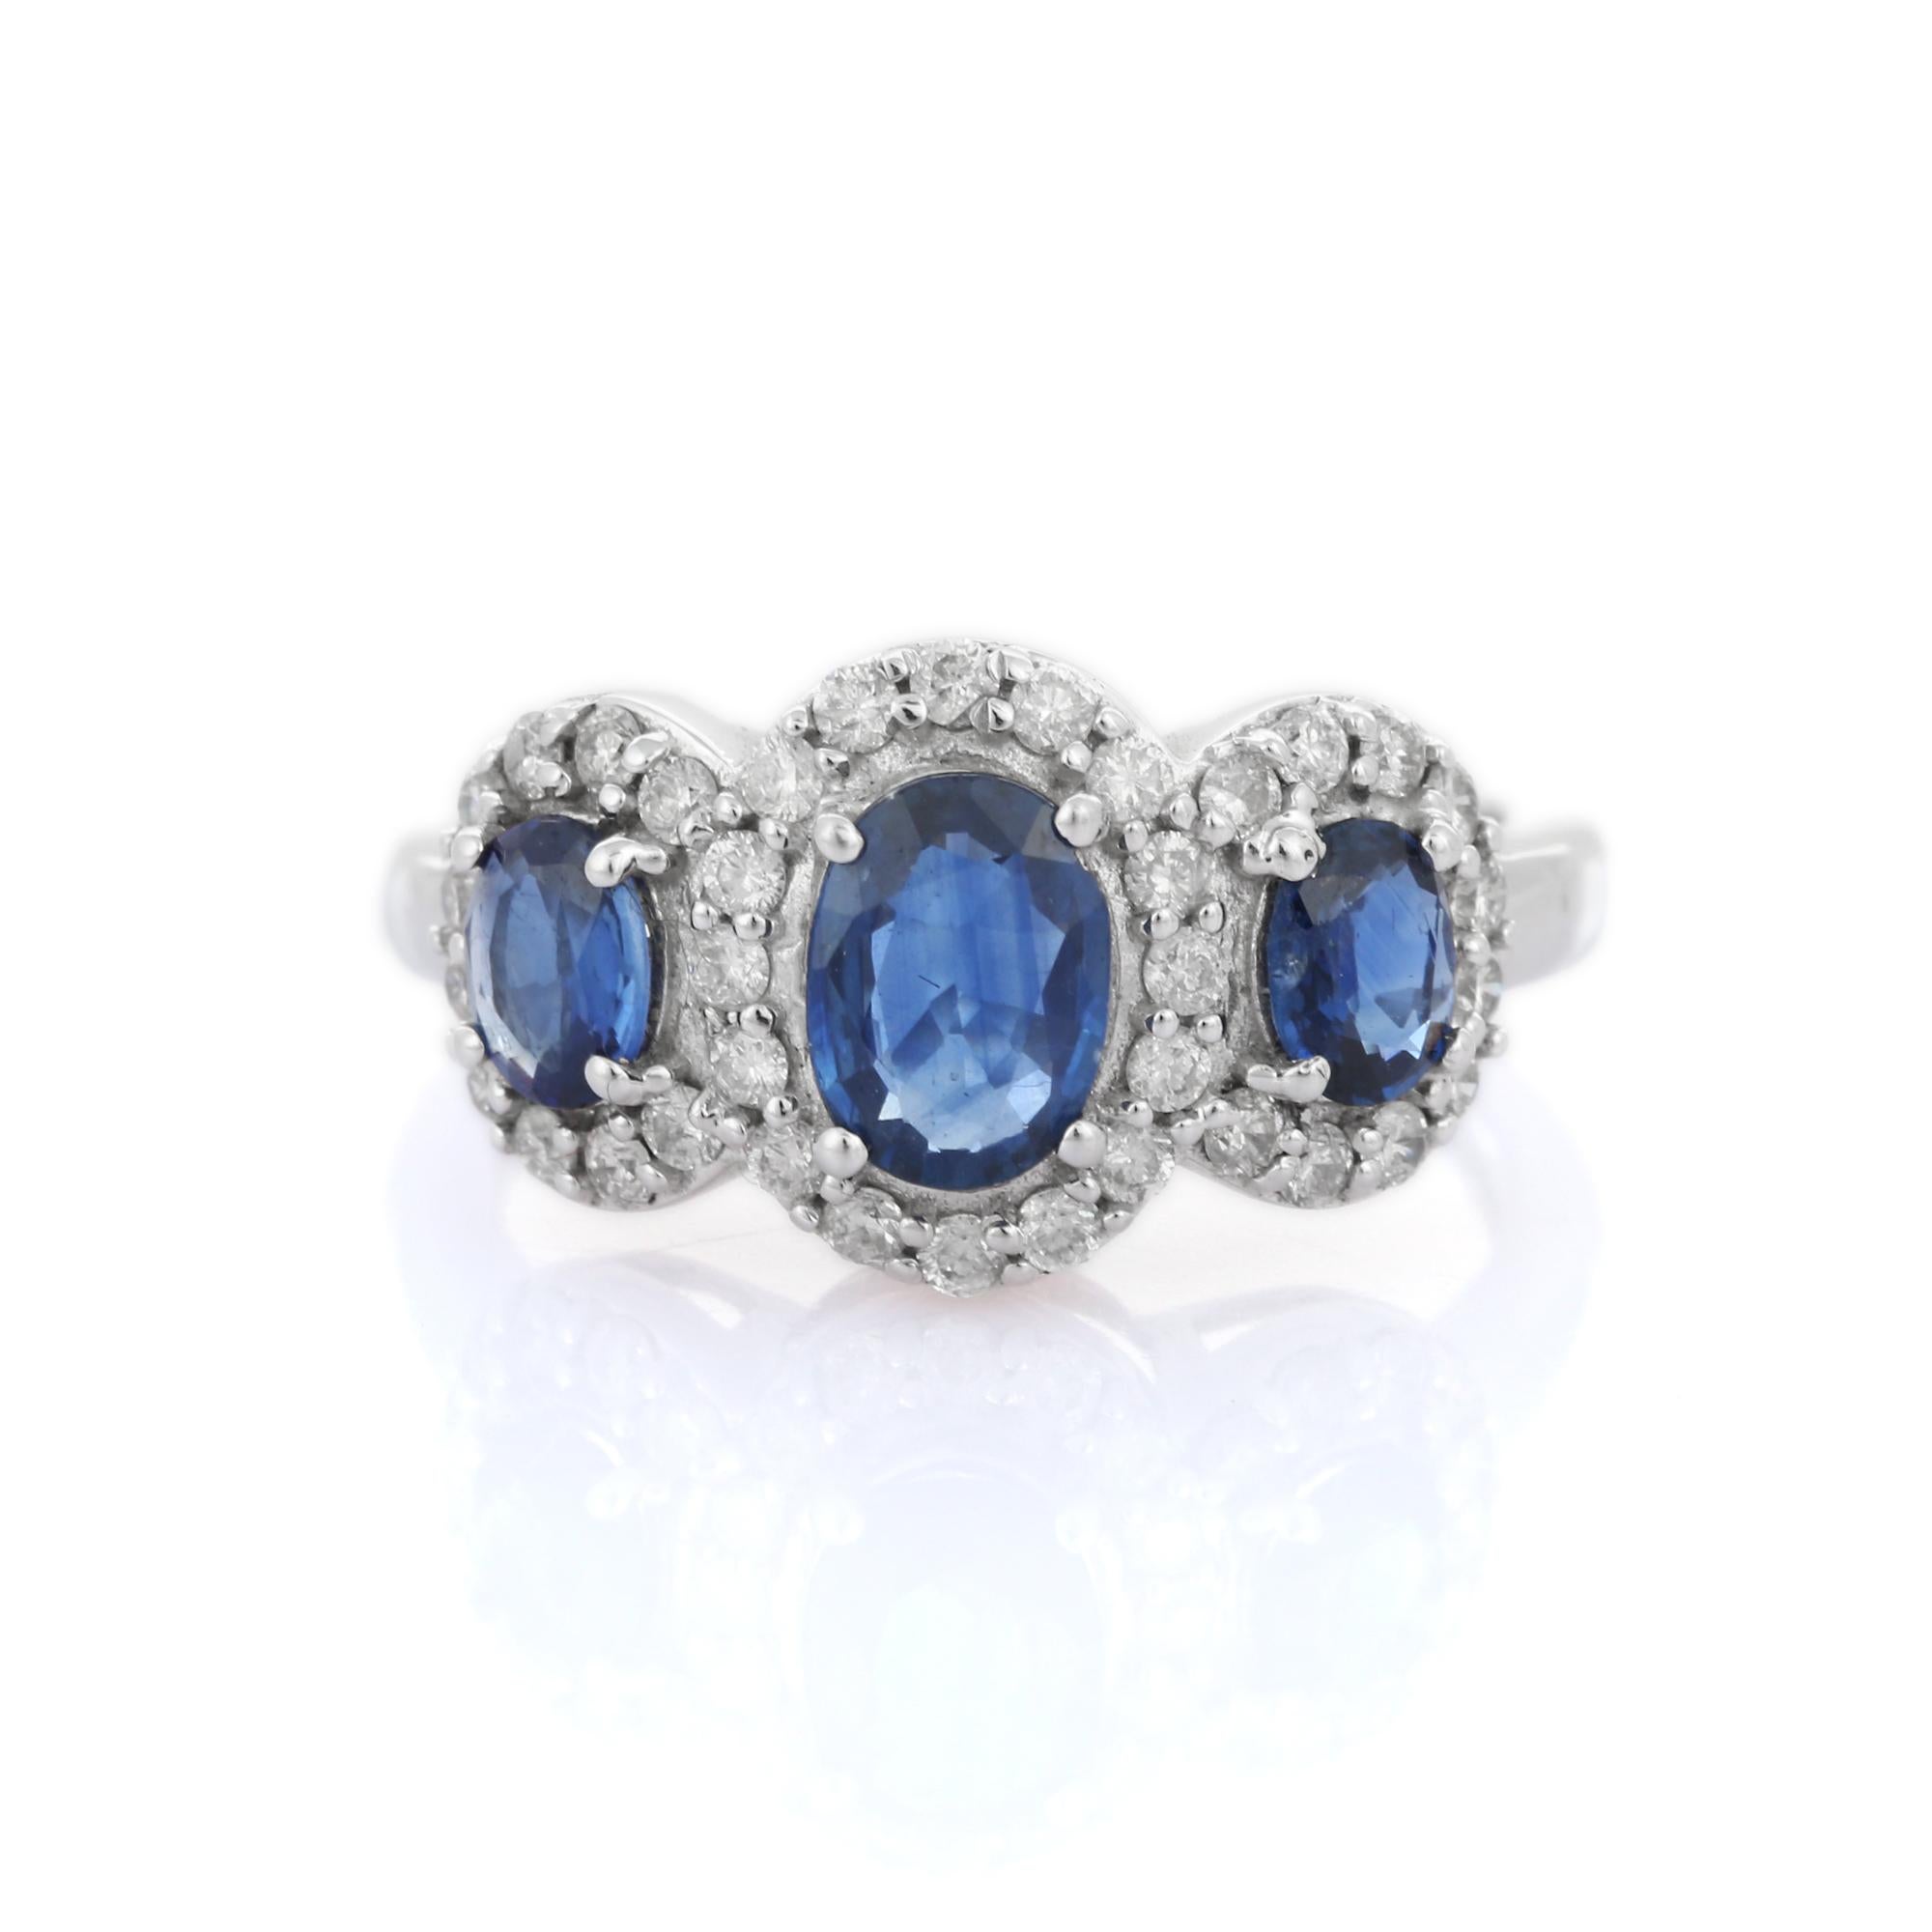 For Sale:  18k Solid White Gold Halo Diamond and Blue Sapphire Three-Stone Engagement Ring 3